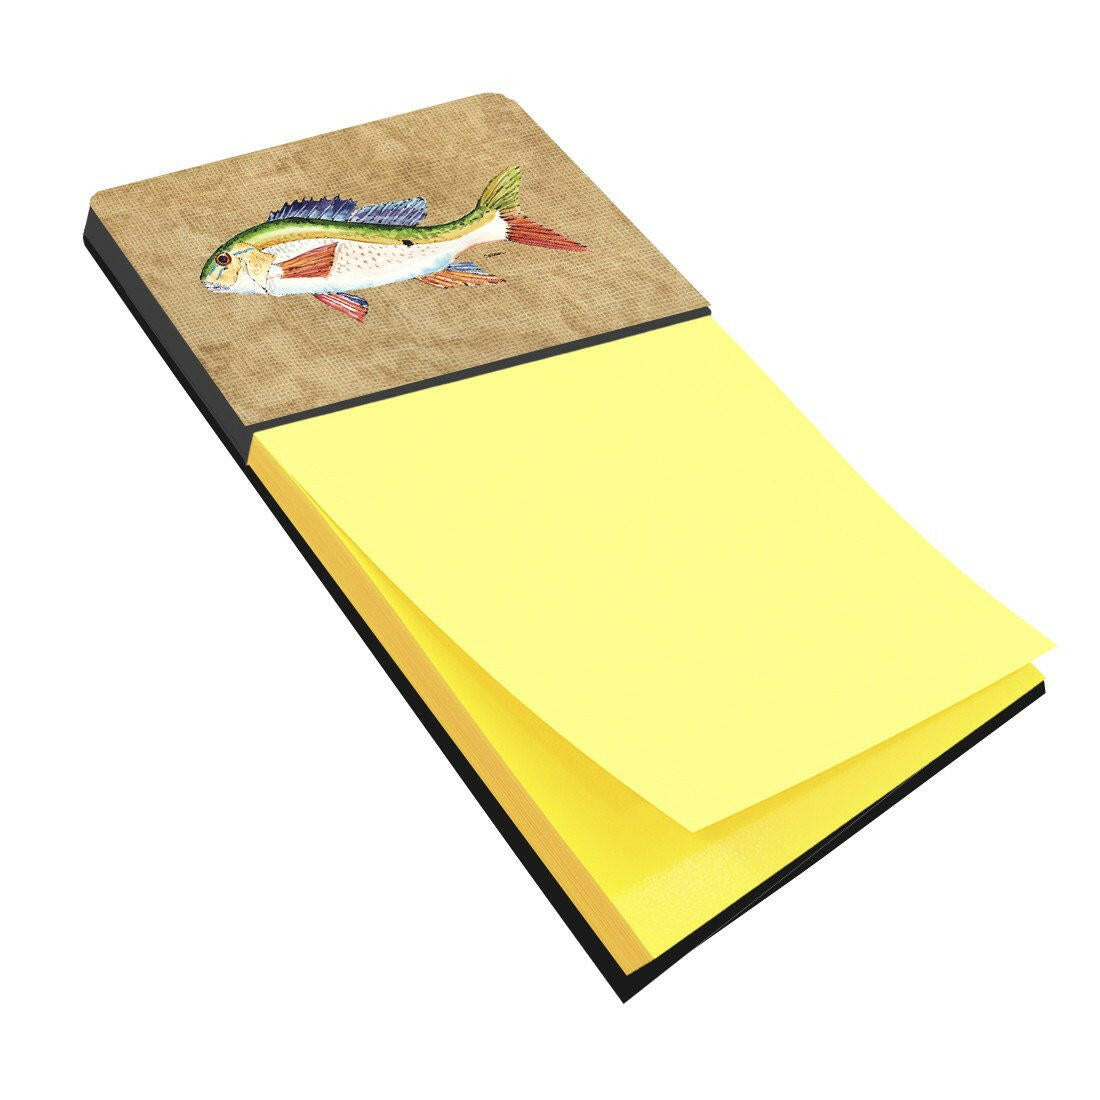 Rainbow Trout Refiillable Sticky Note Holder or Postit Note Dispenser 8816SN by Caroline's Treasures